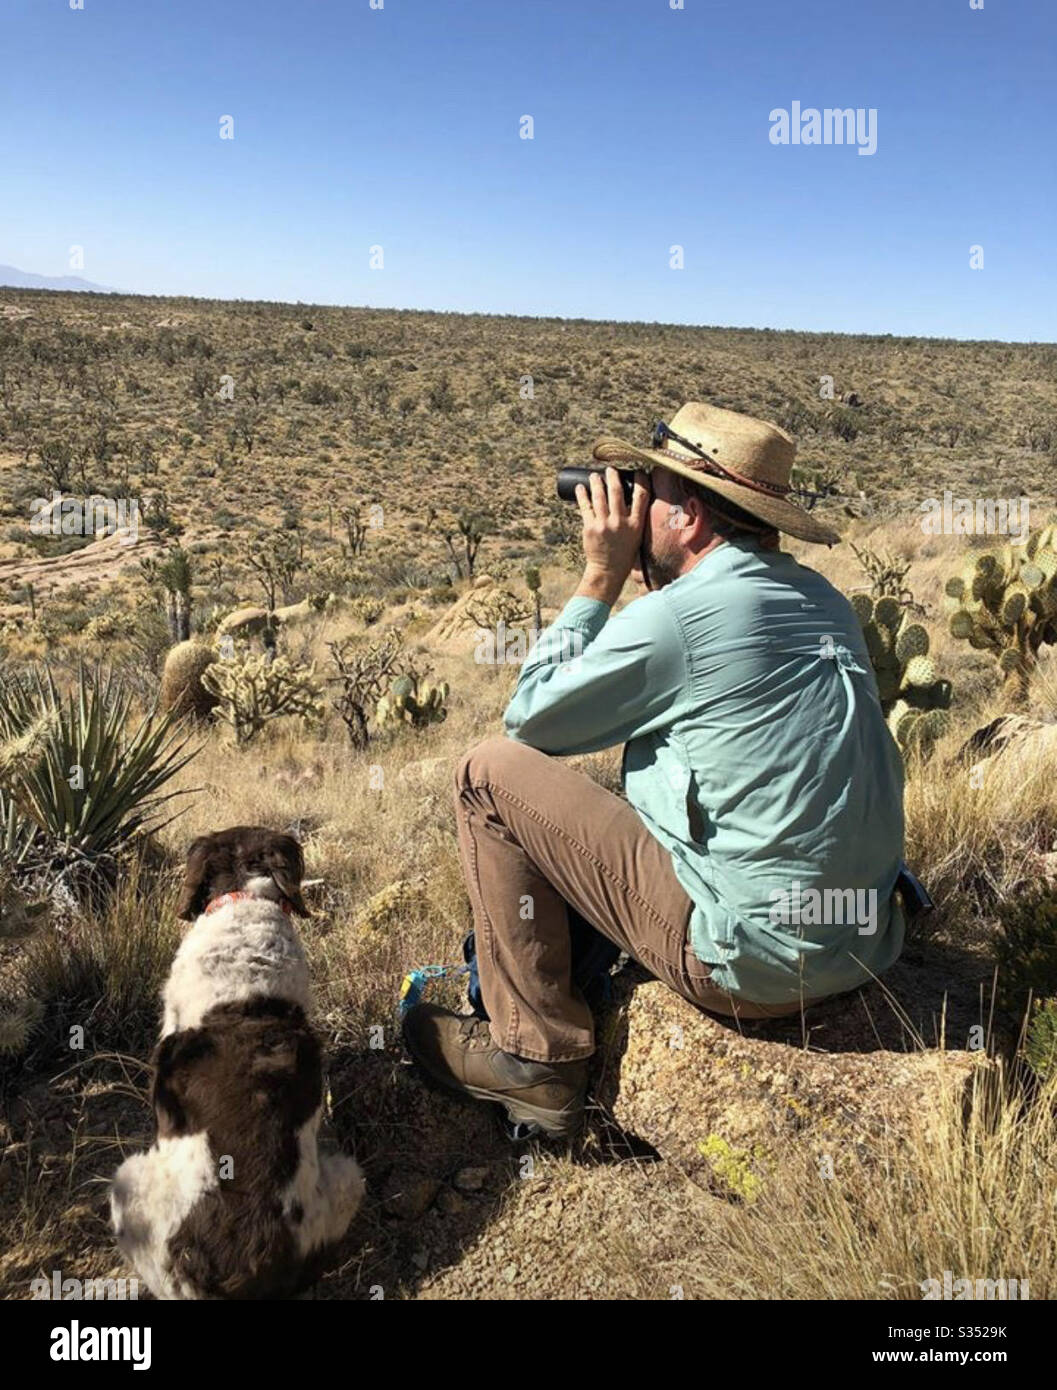 Scouting for deer in the Mojave preserves cima dome Stock Photo